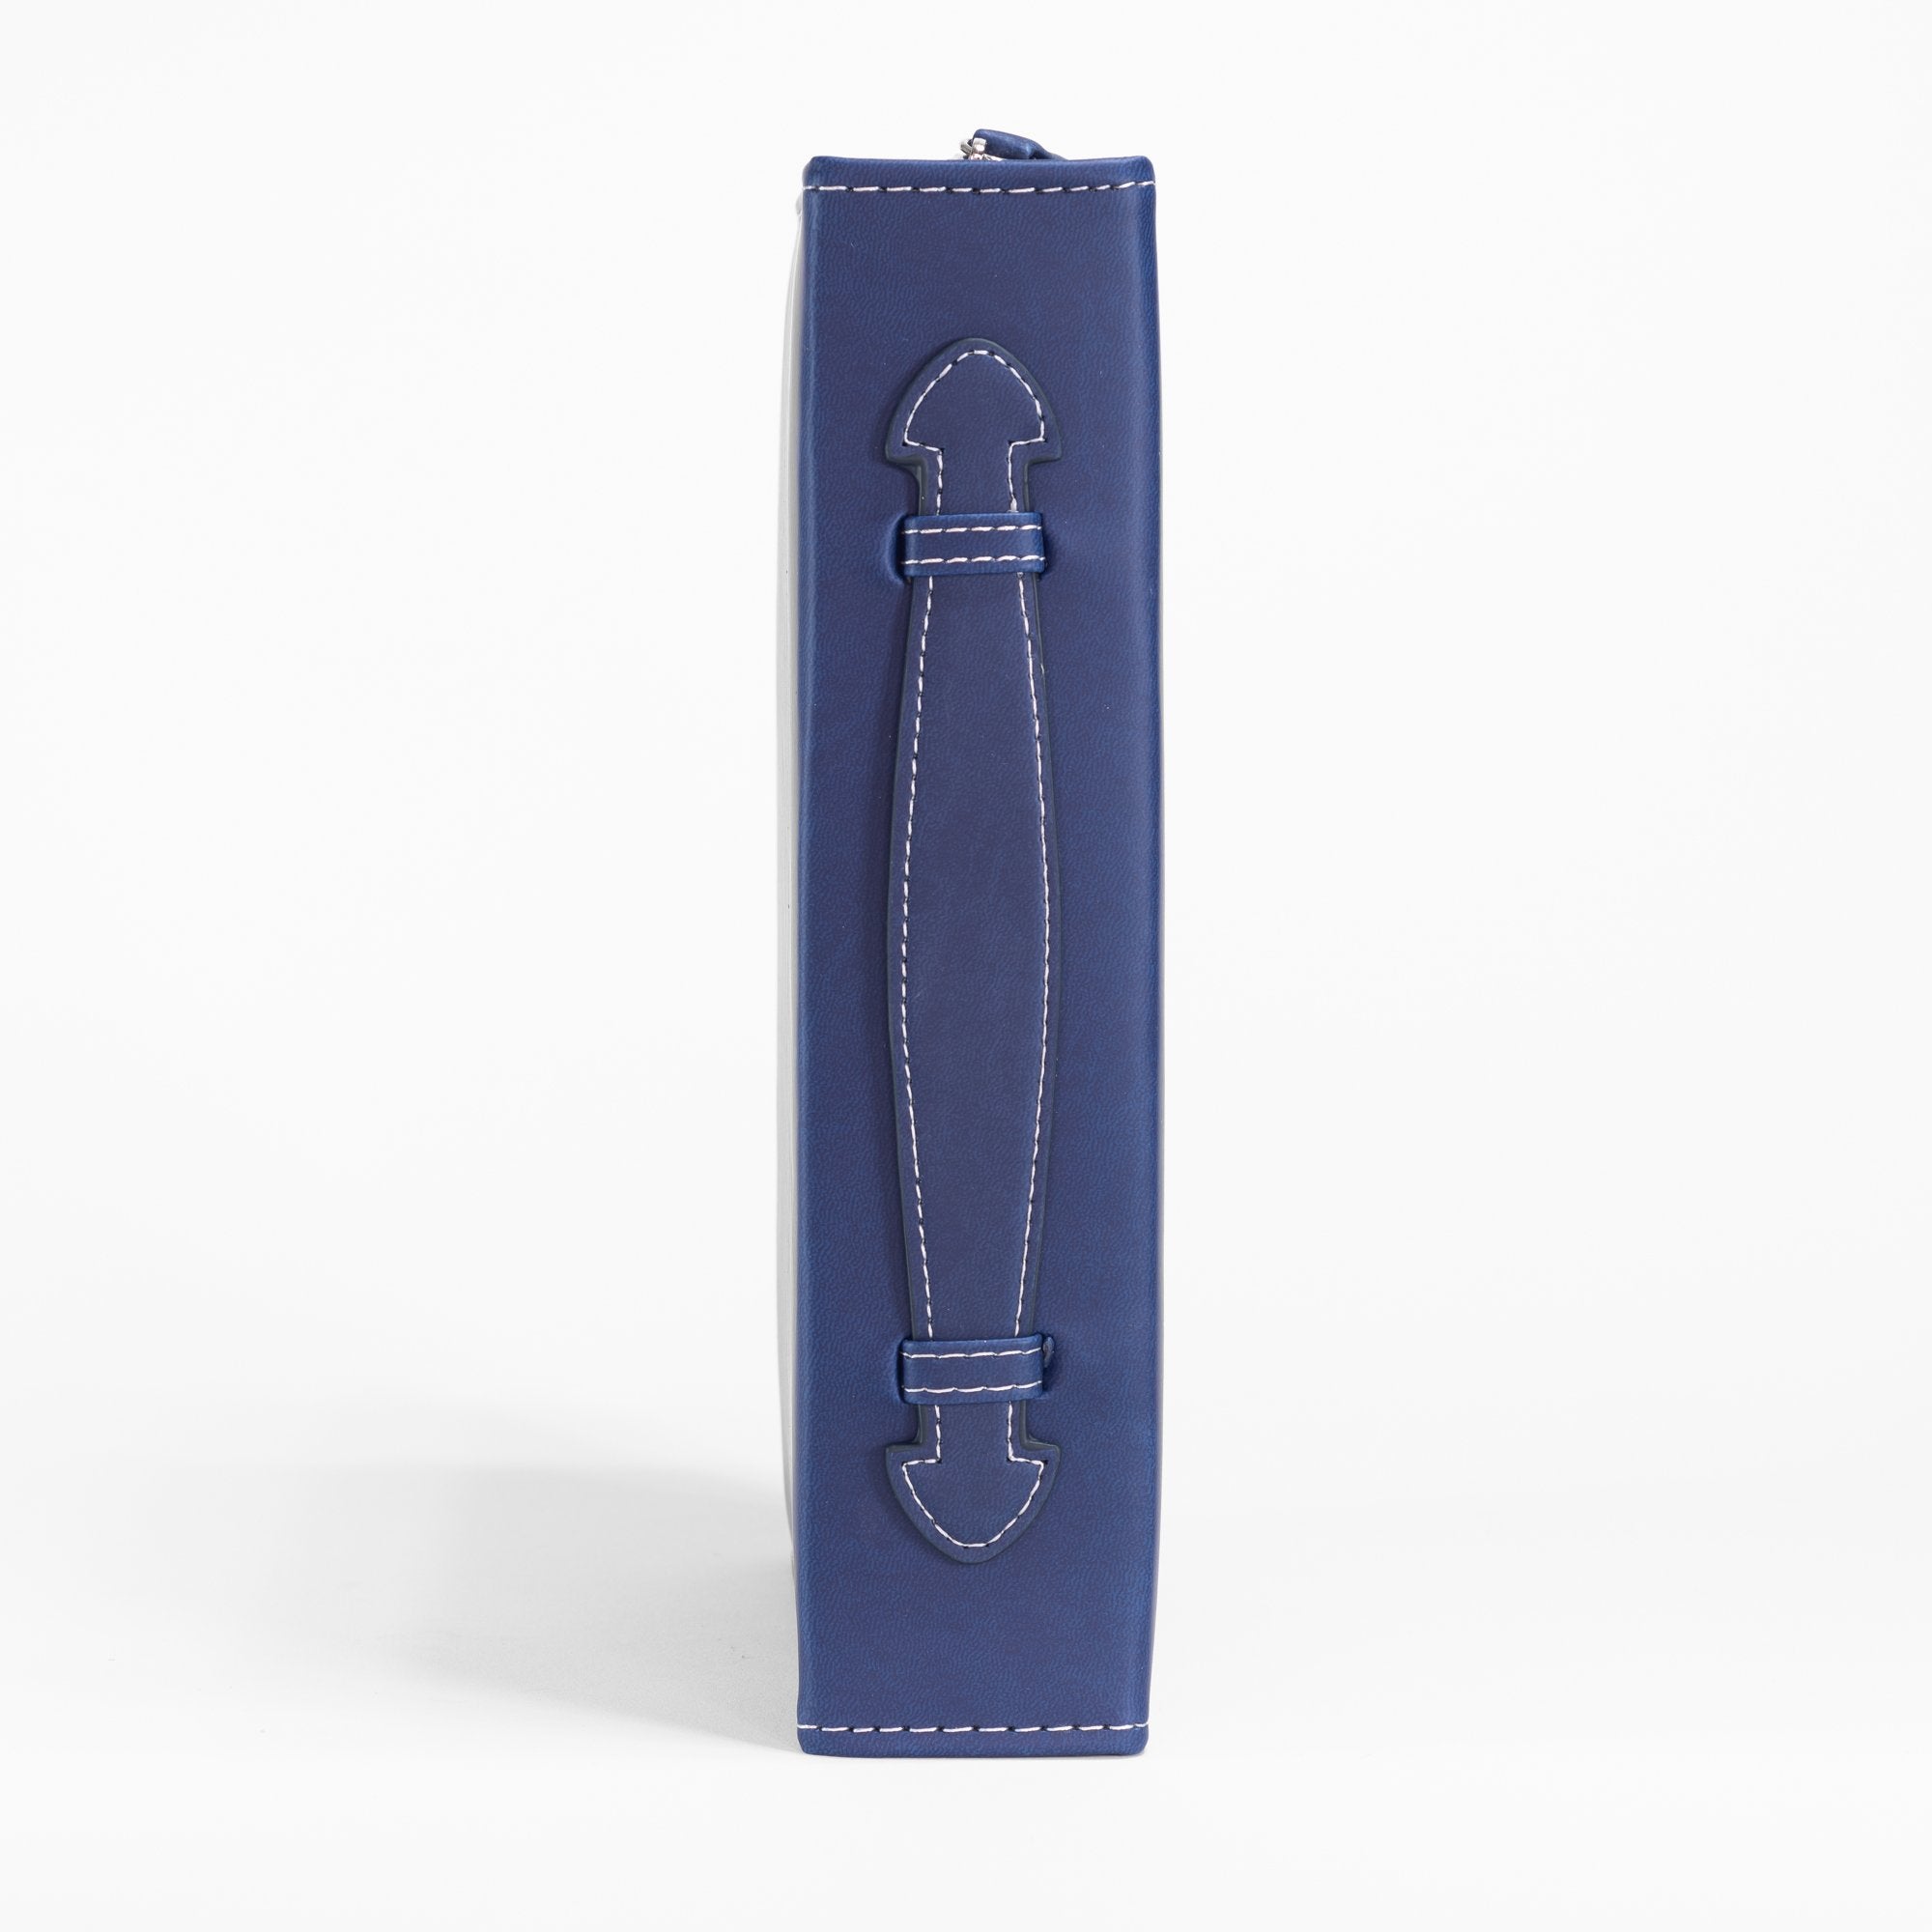 Divine Details: Bible Cover Navy Blue - Flying Compass Rose